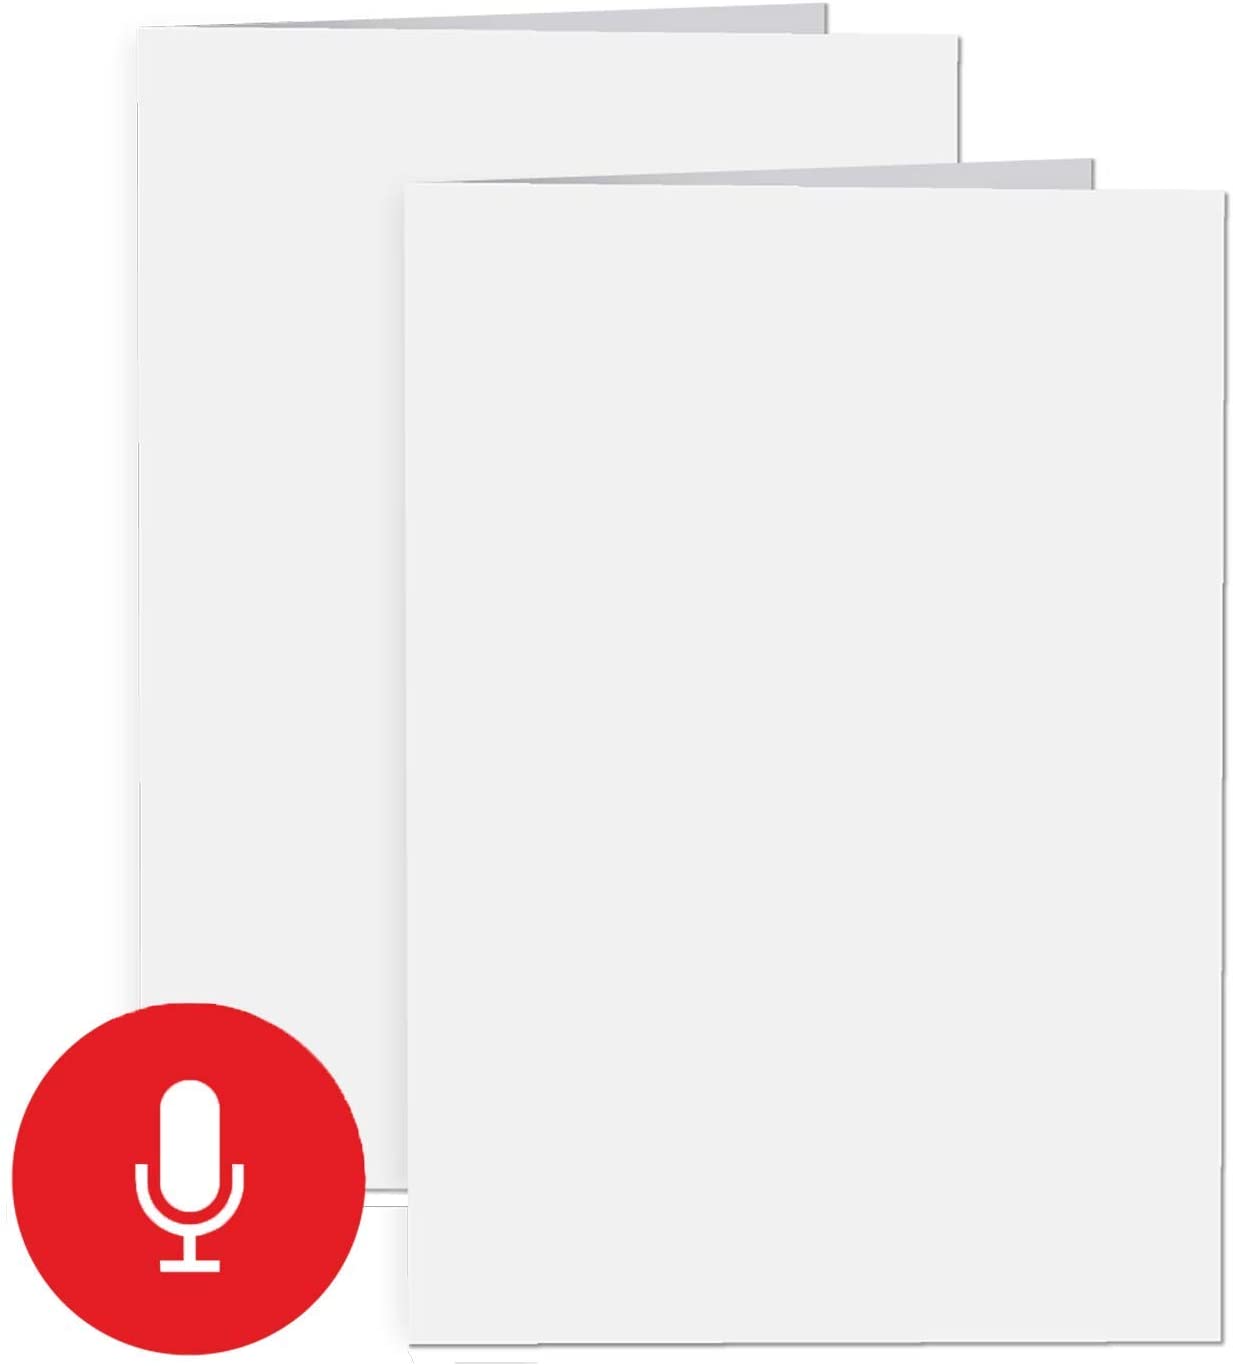 2 Pack, Inventiv 30 Second Recordable DIY Greeting Card, Voice Recorder Module, Blank White:Apply Custom Design Artwork